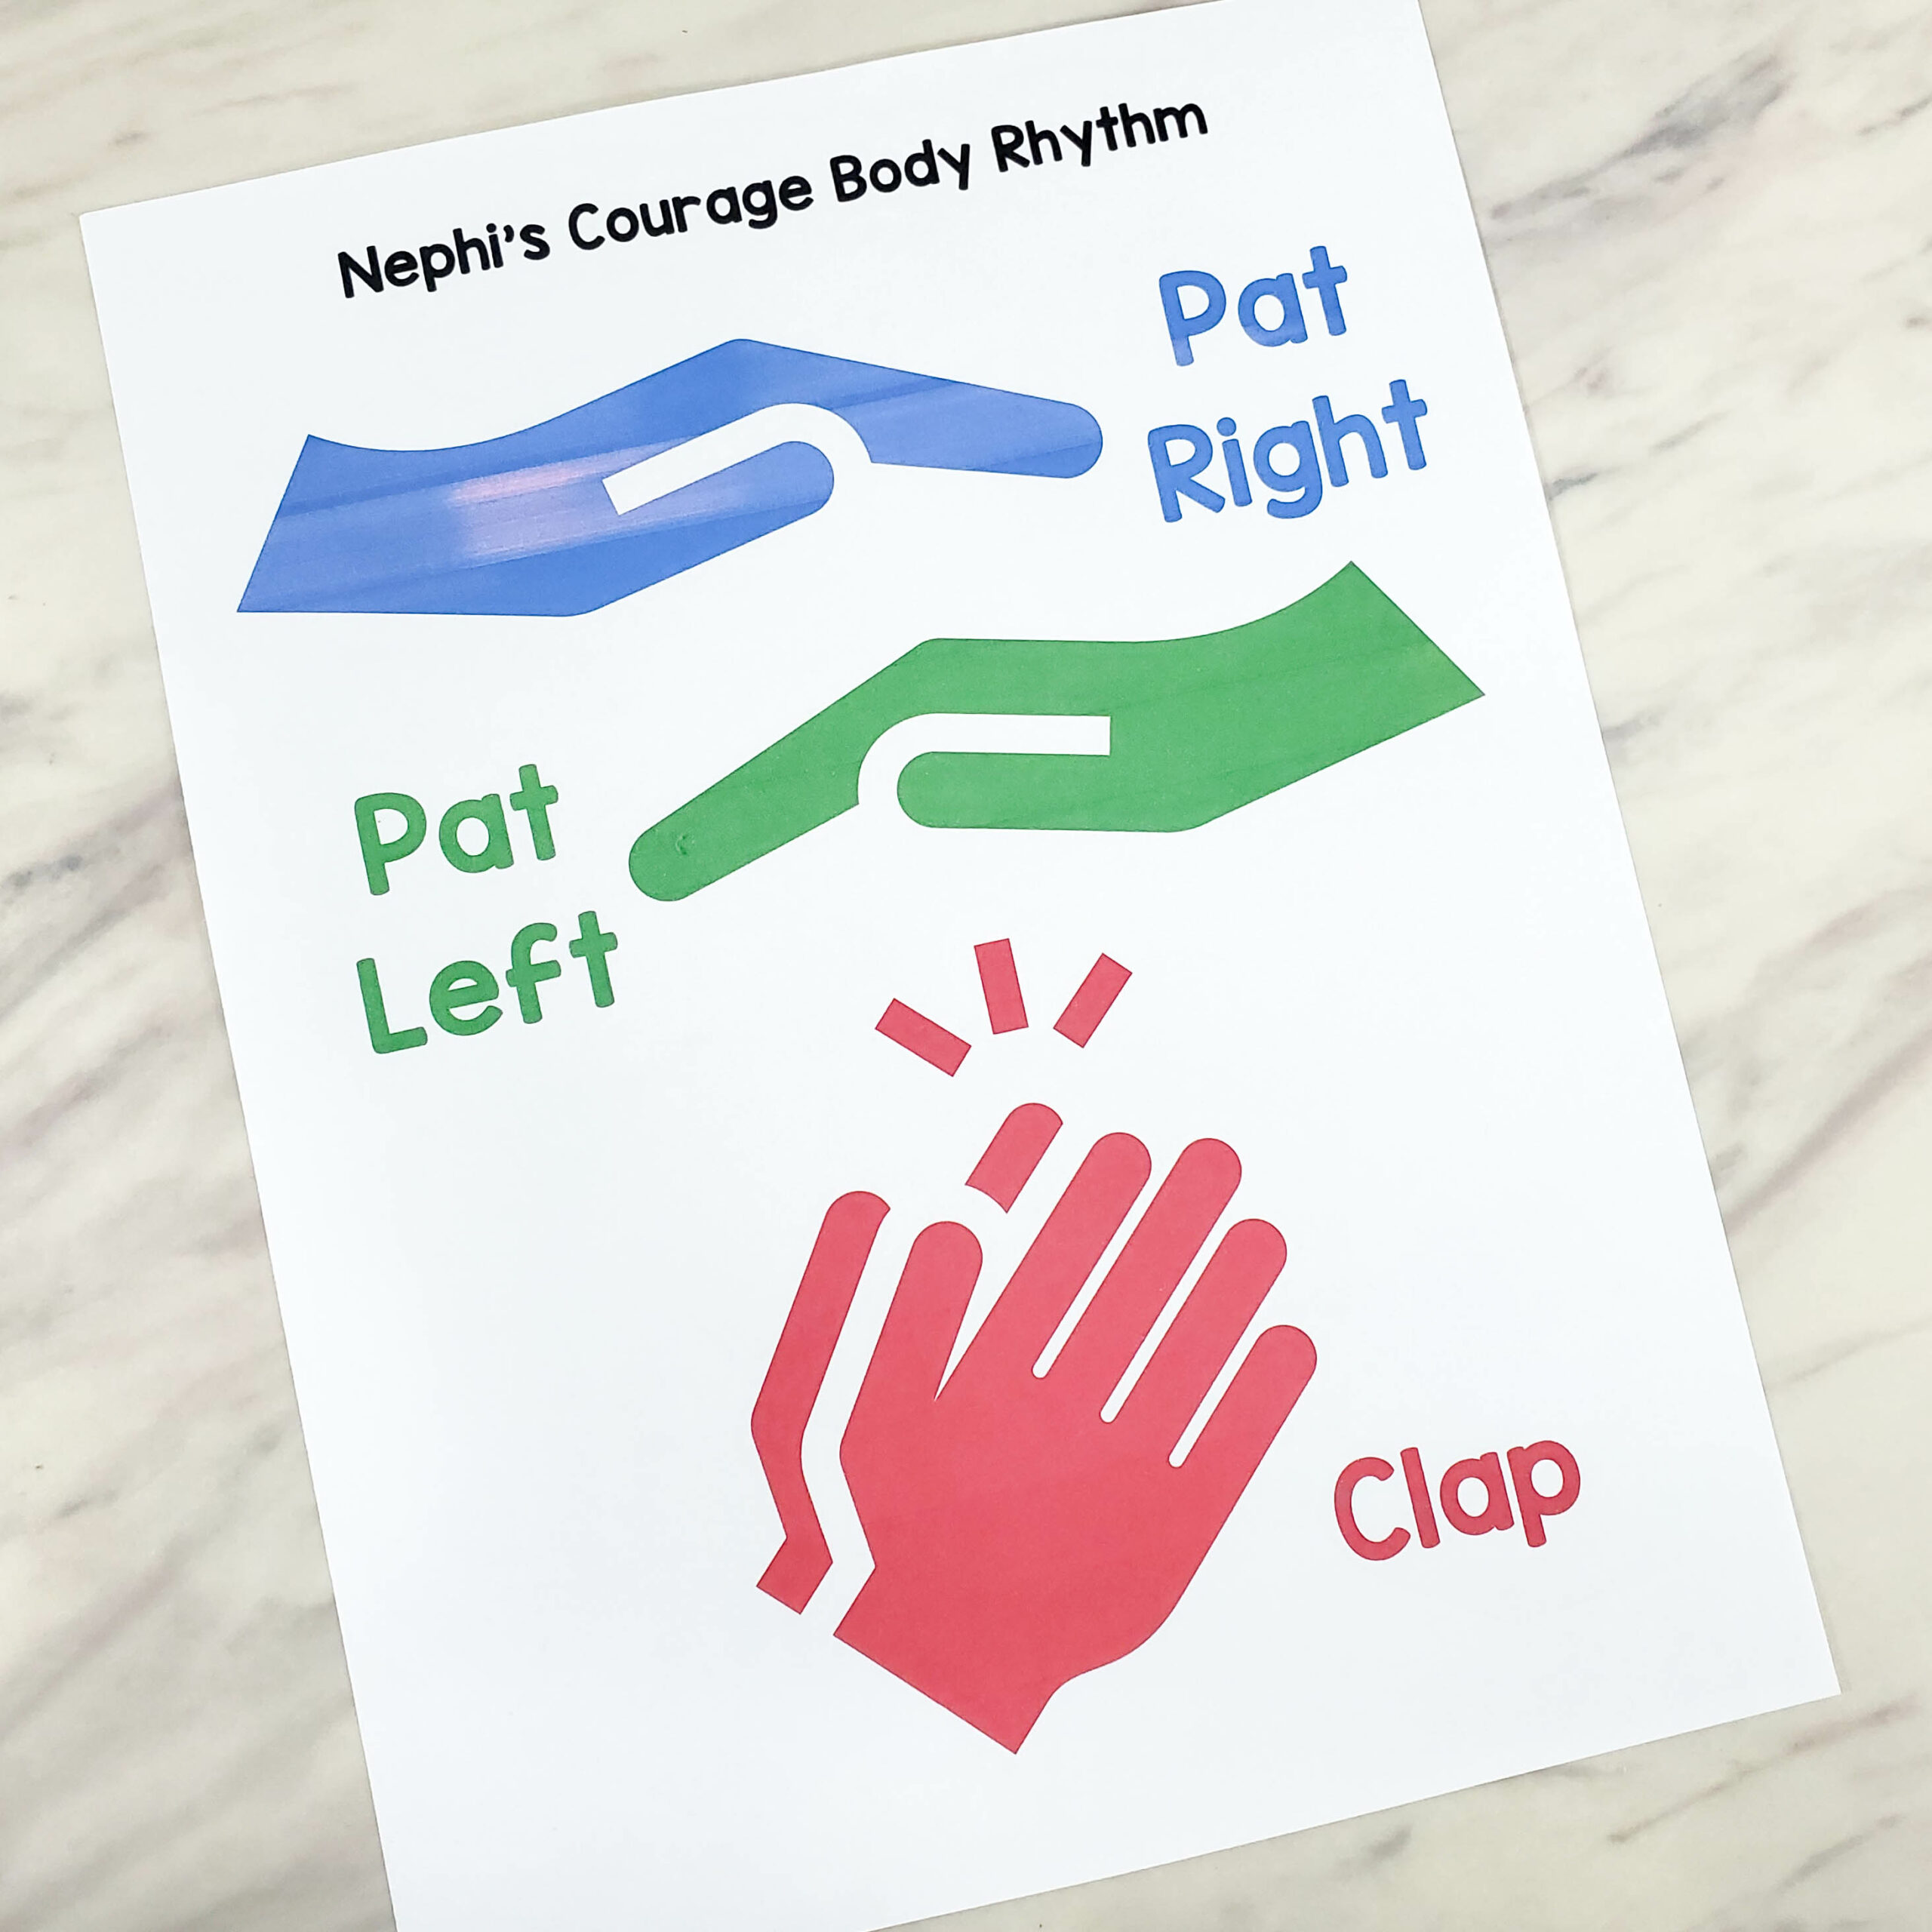 Nephi's Courage Body Rhythm fun singing time movement activity! You'll pat and clap along following the melody. Then, add an extra layer of complexity to the chorus for a challenge, if you'd like! Fun lesson plan and printable pattern helps for LDS Primary music leaders.